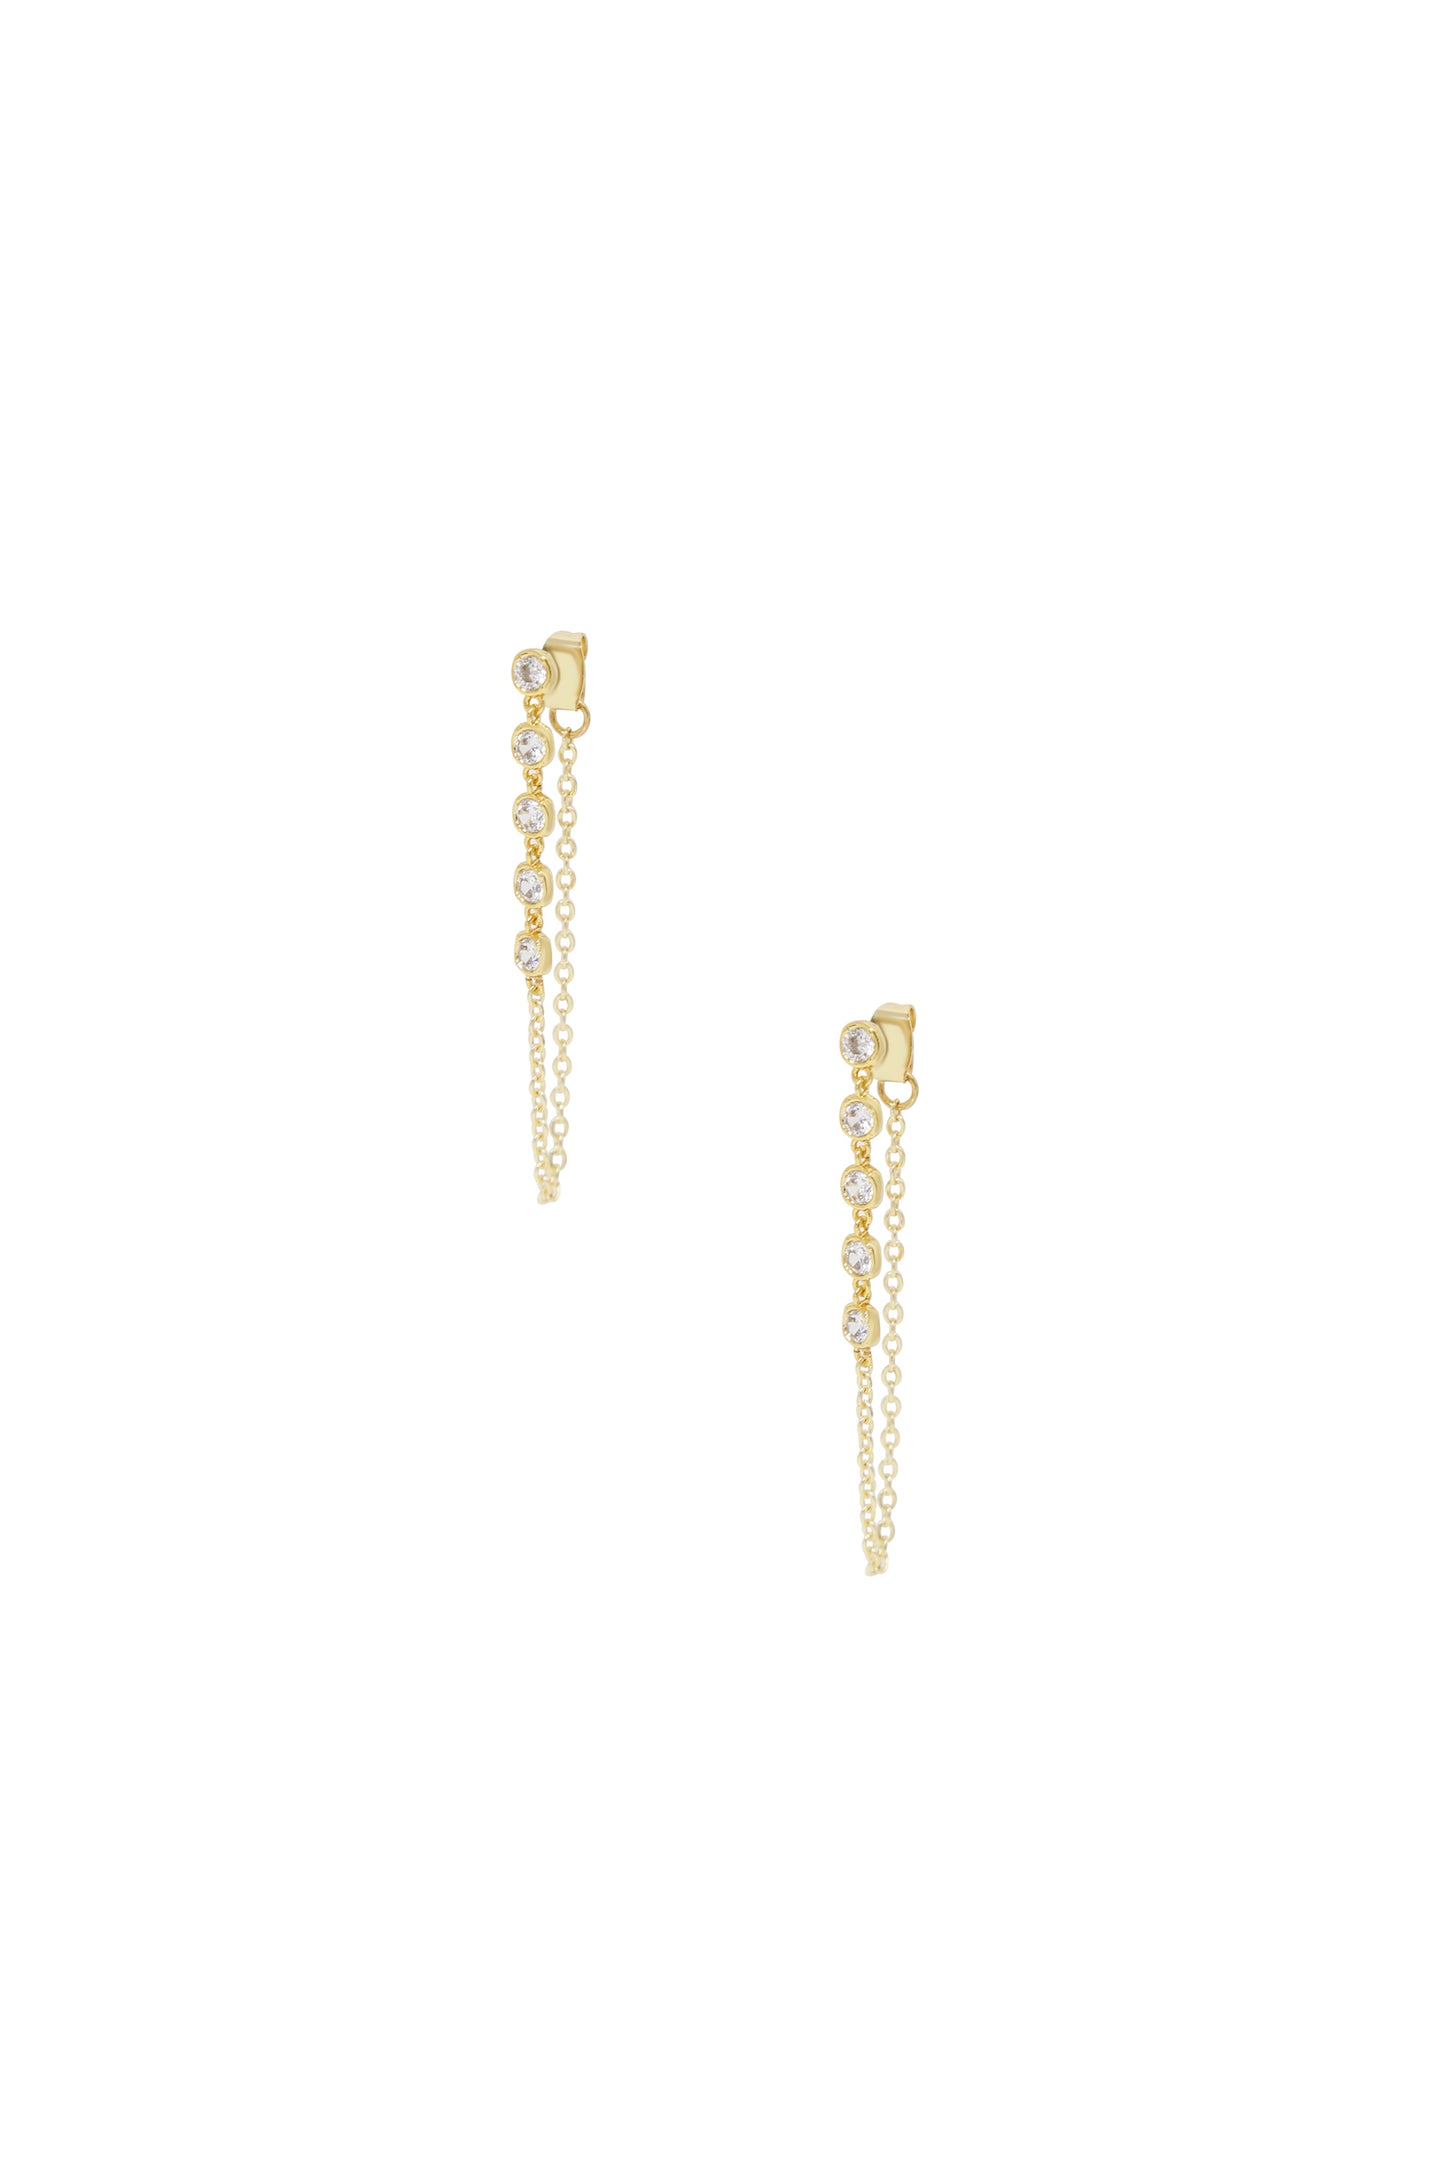 Crystal Chain Danglers 18k Gold Plated Earring